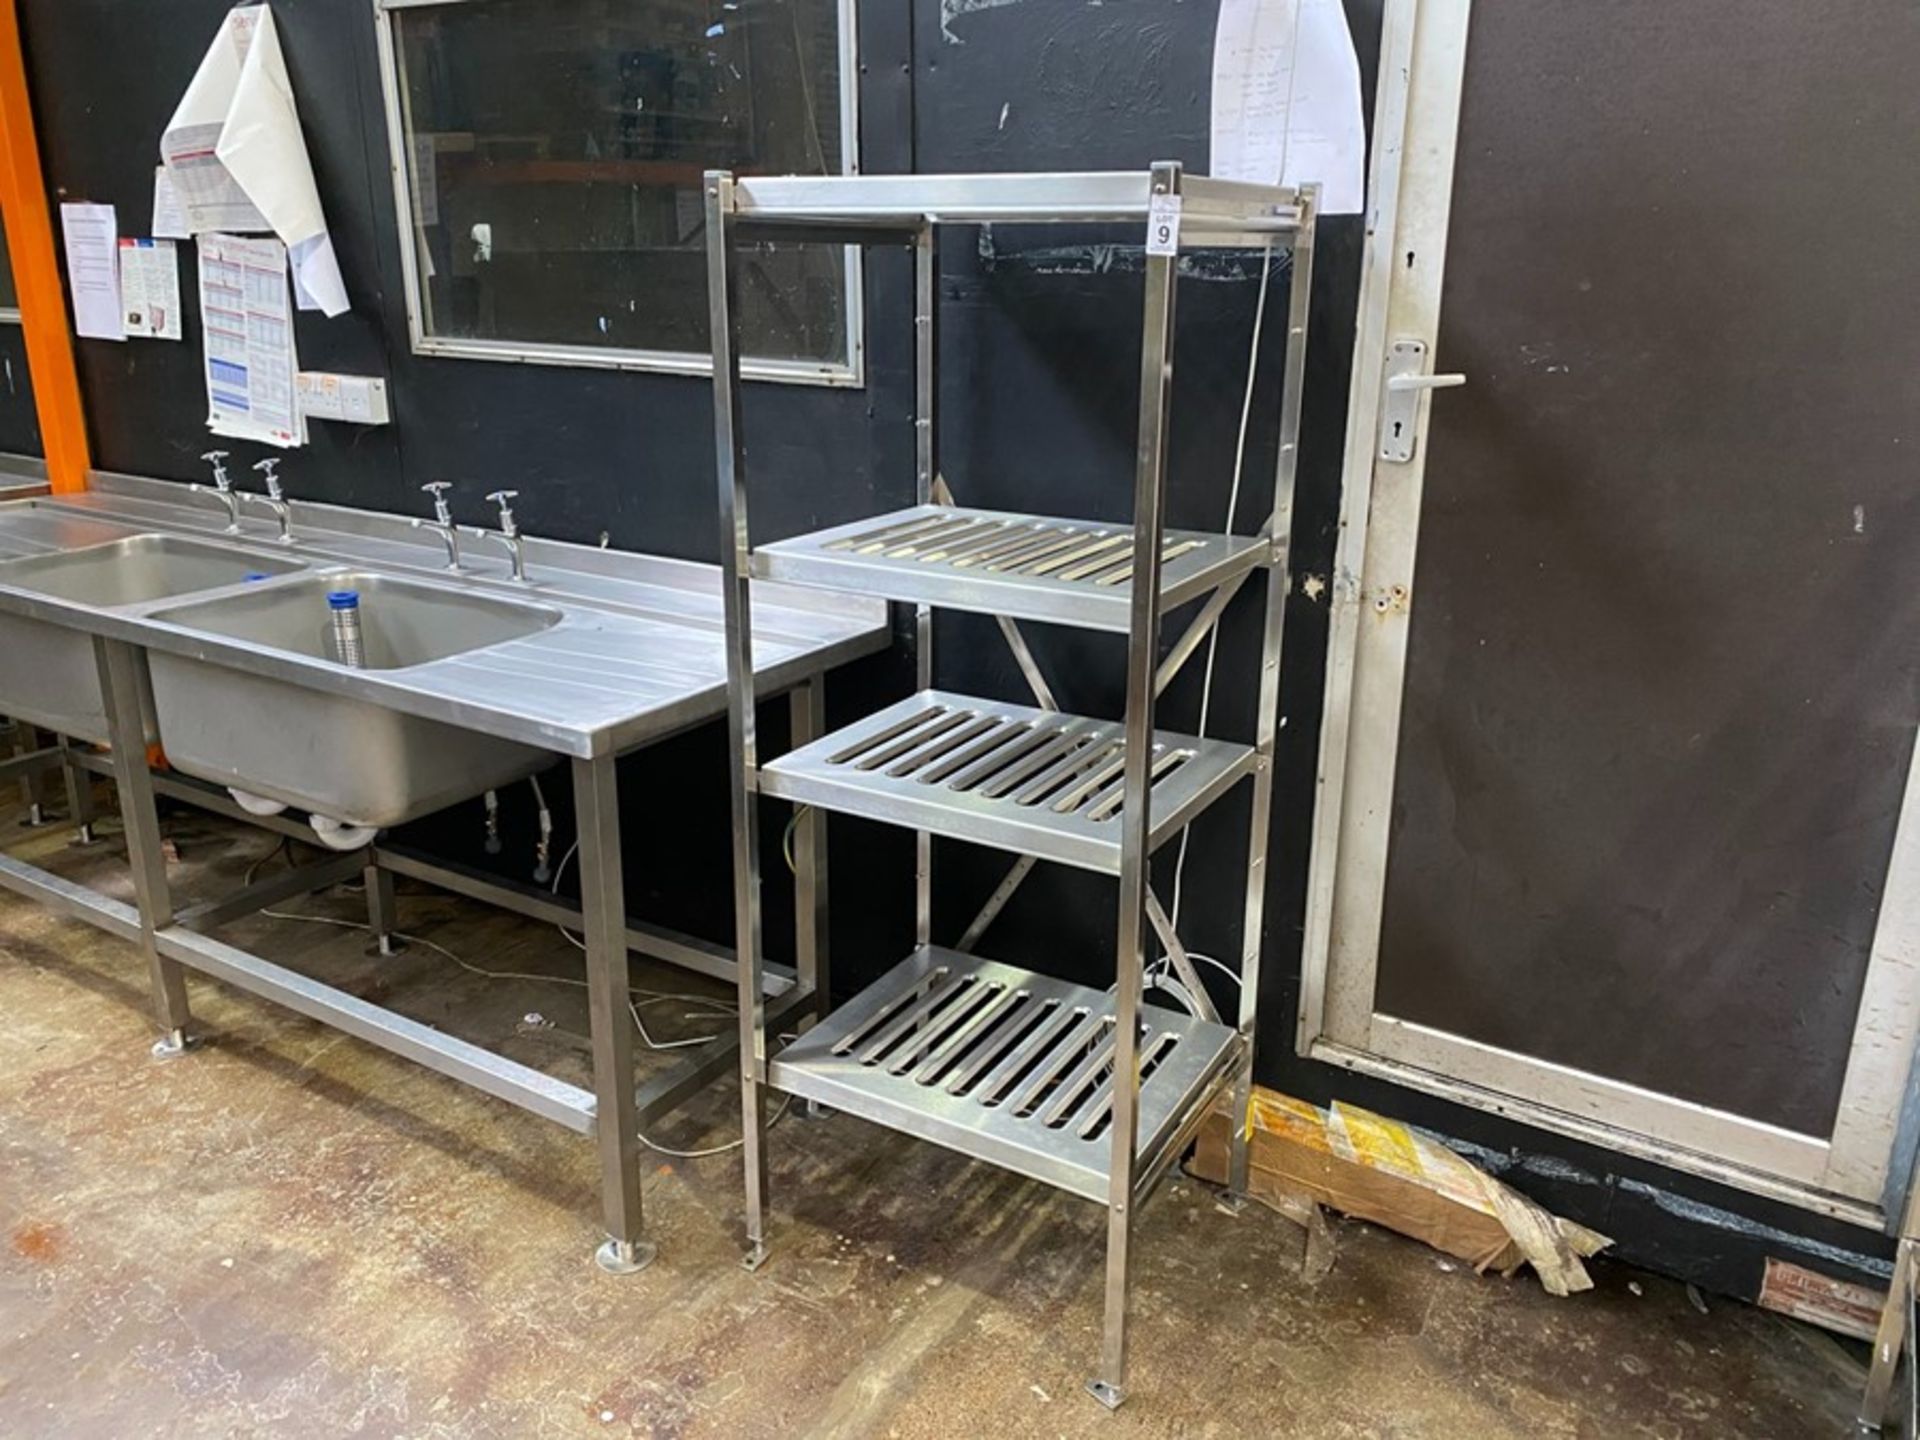 STAINLESS STEEL 4 TIER CATERING SHELVING UNIT